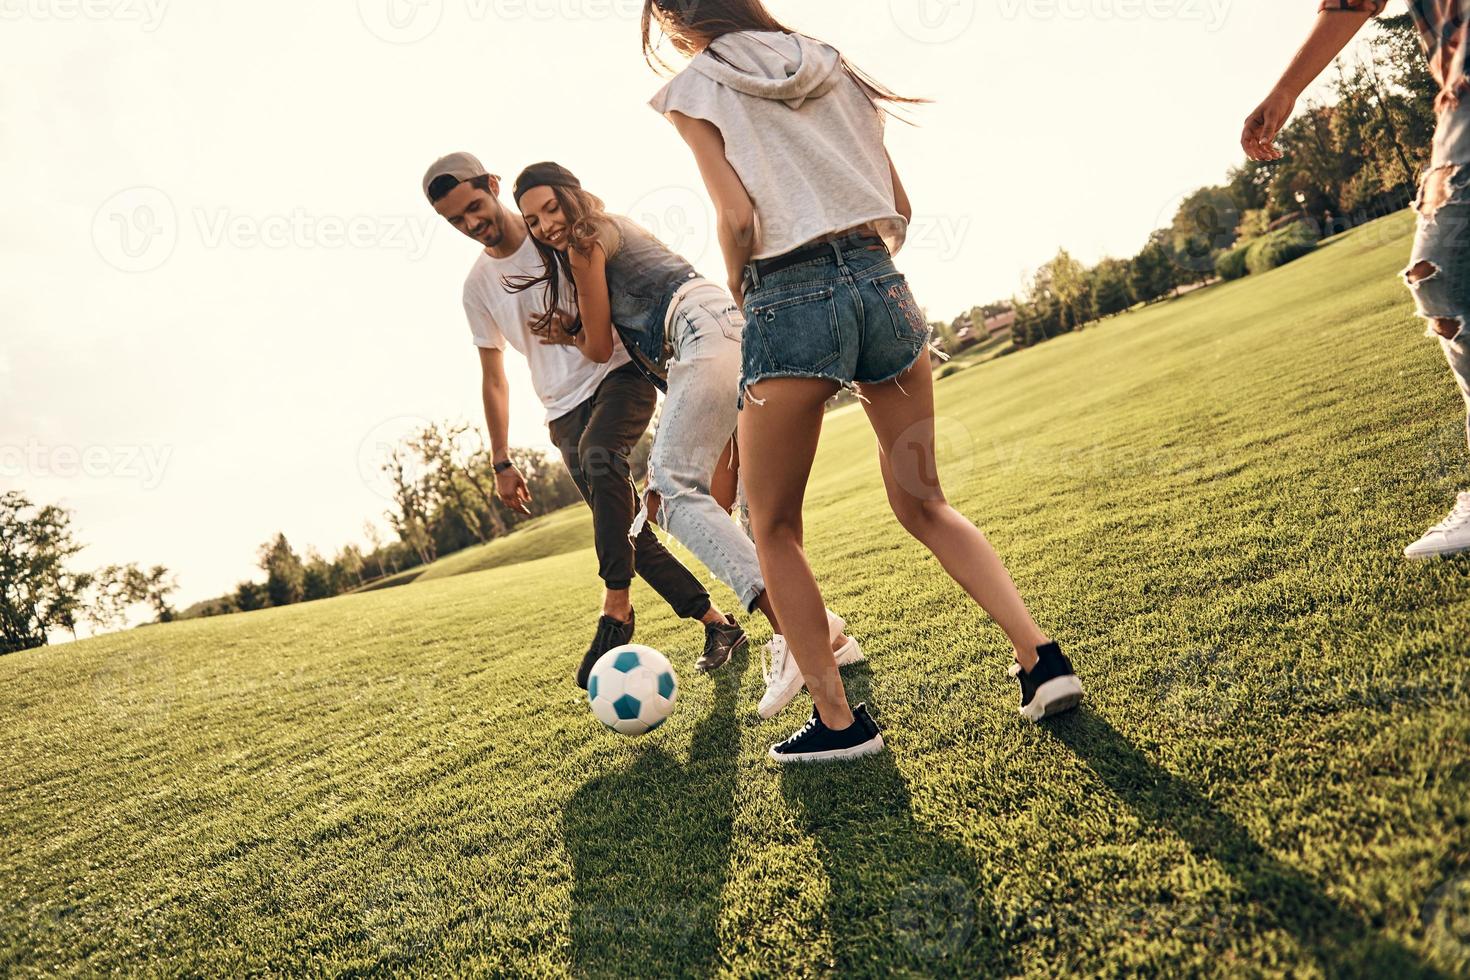 Trying to win. Group of young smiling people in casual wear enjoying nice summer day while playing soccer outdoors photo